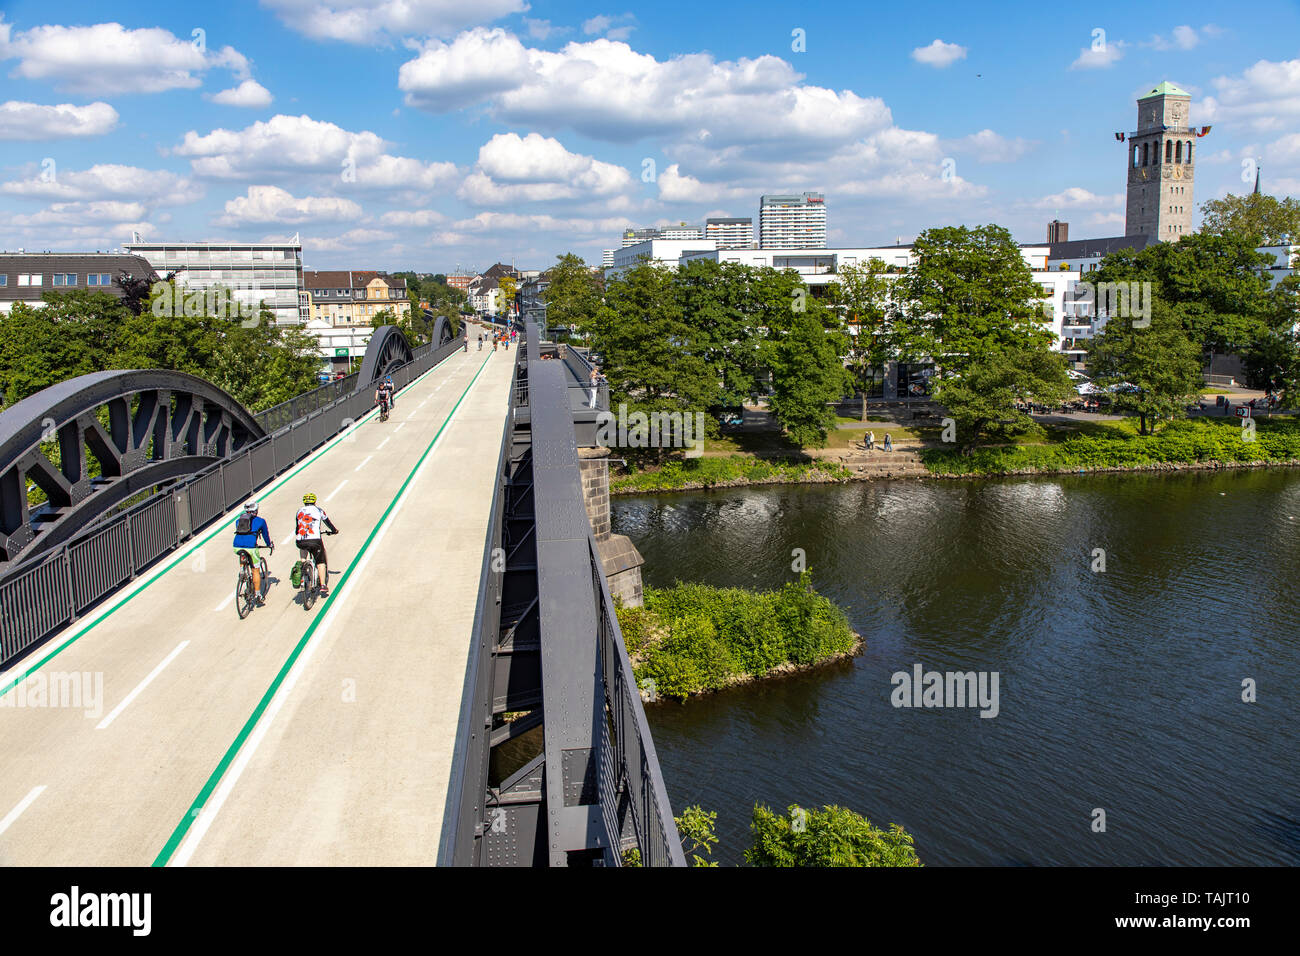 Radschnellweg RS1, a cycle highway,  in Mülheim an der Ruhr, Germany, on a former railway bridge across the Ruhr, the whole route will be over 100 KM  Stock Photo